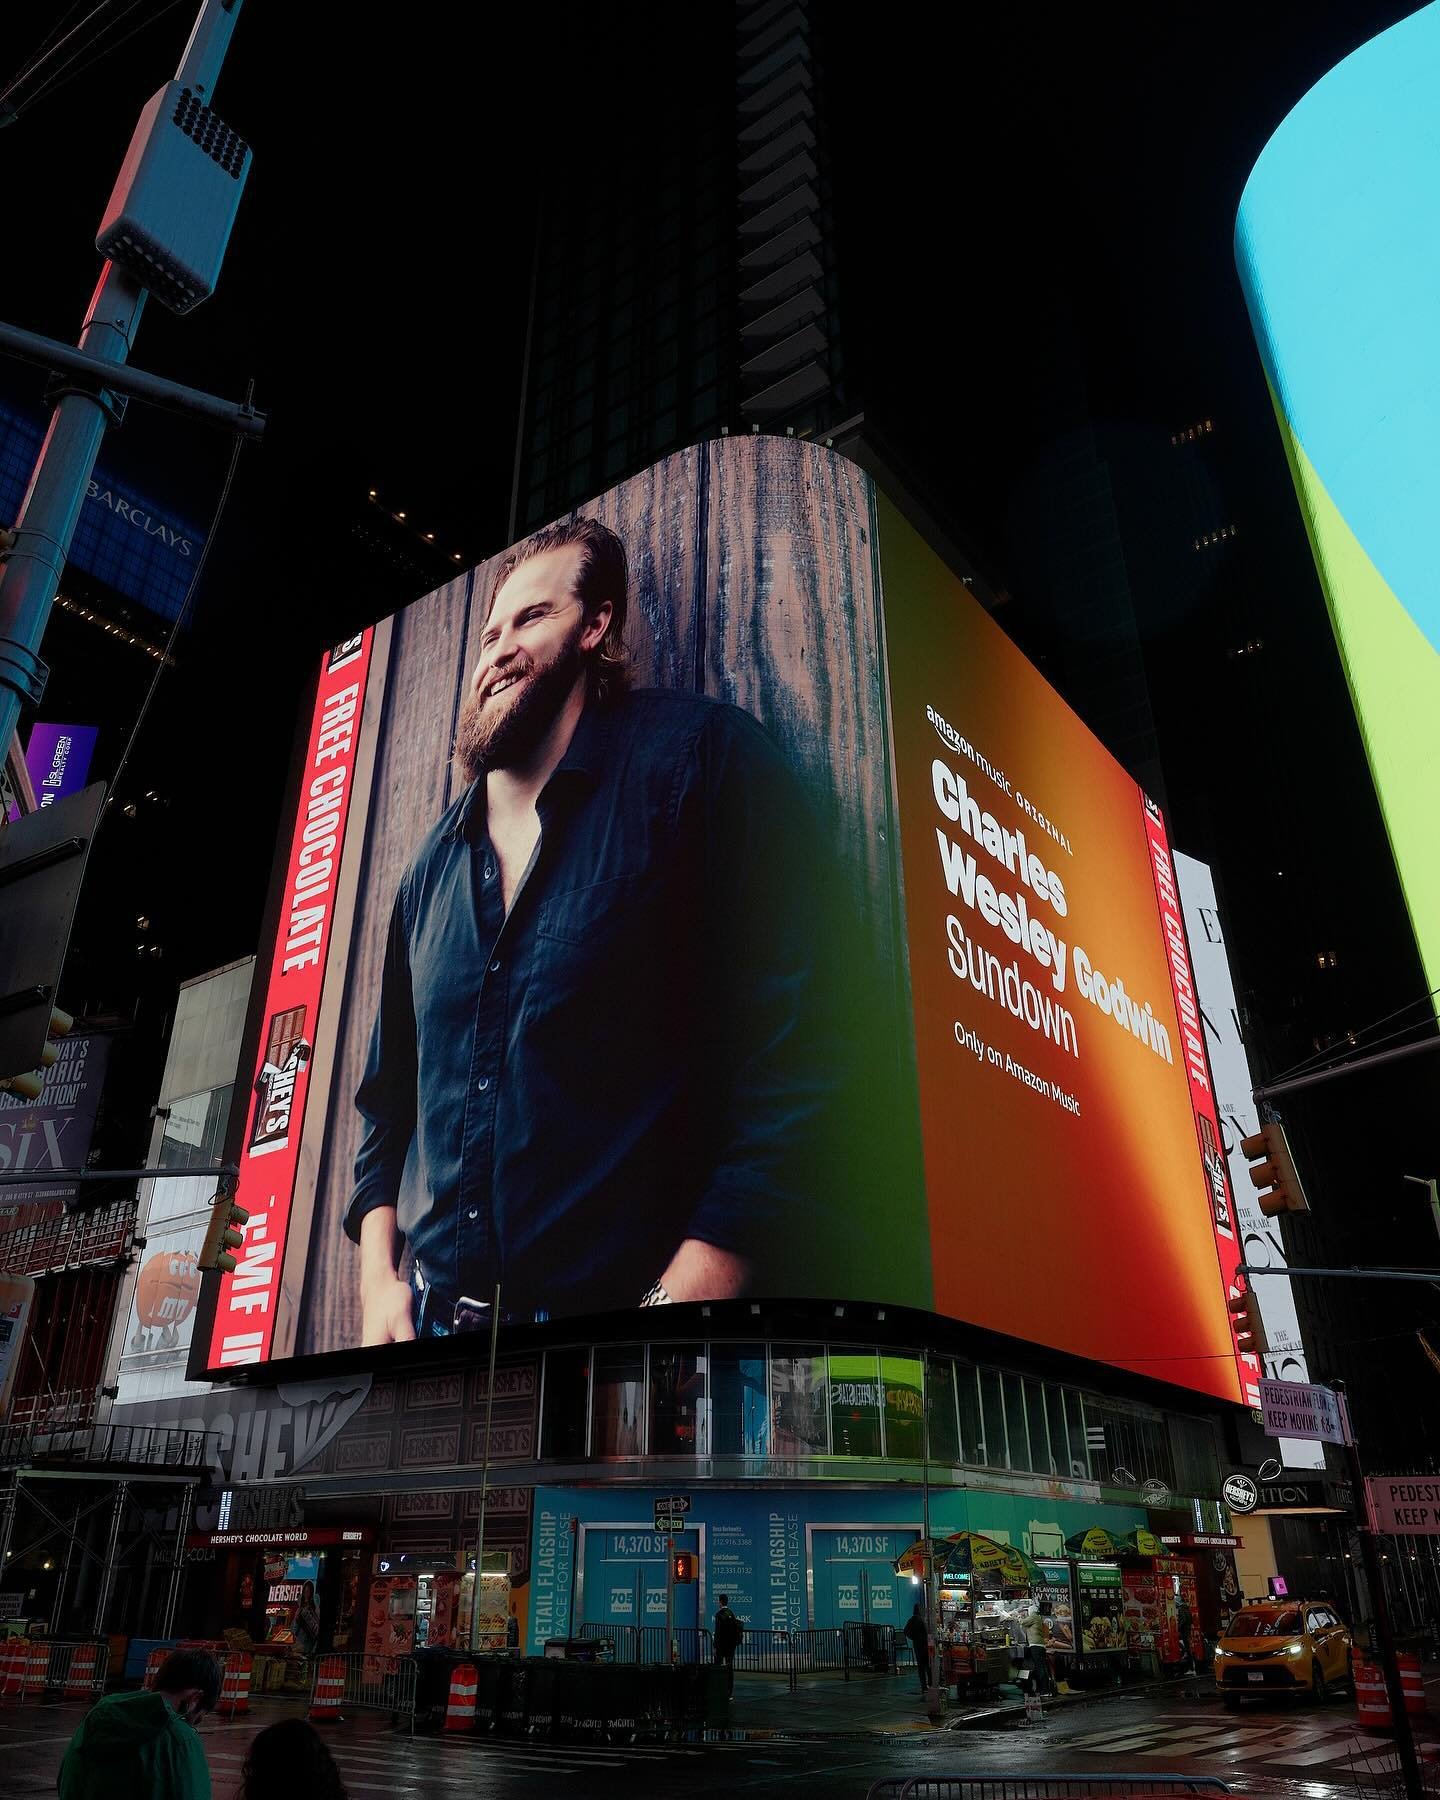 @charleswgodwin in Times Square thanks to @amazonmusic. And he played his first ever stadium show opening for @lukecombs last night. Pretty solid Friday. 👊👊👊